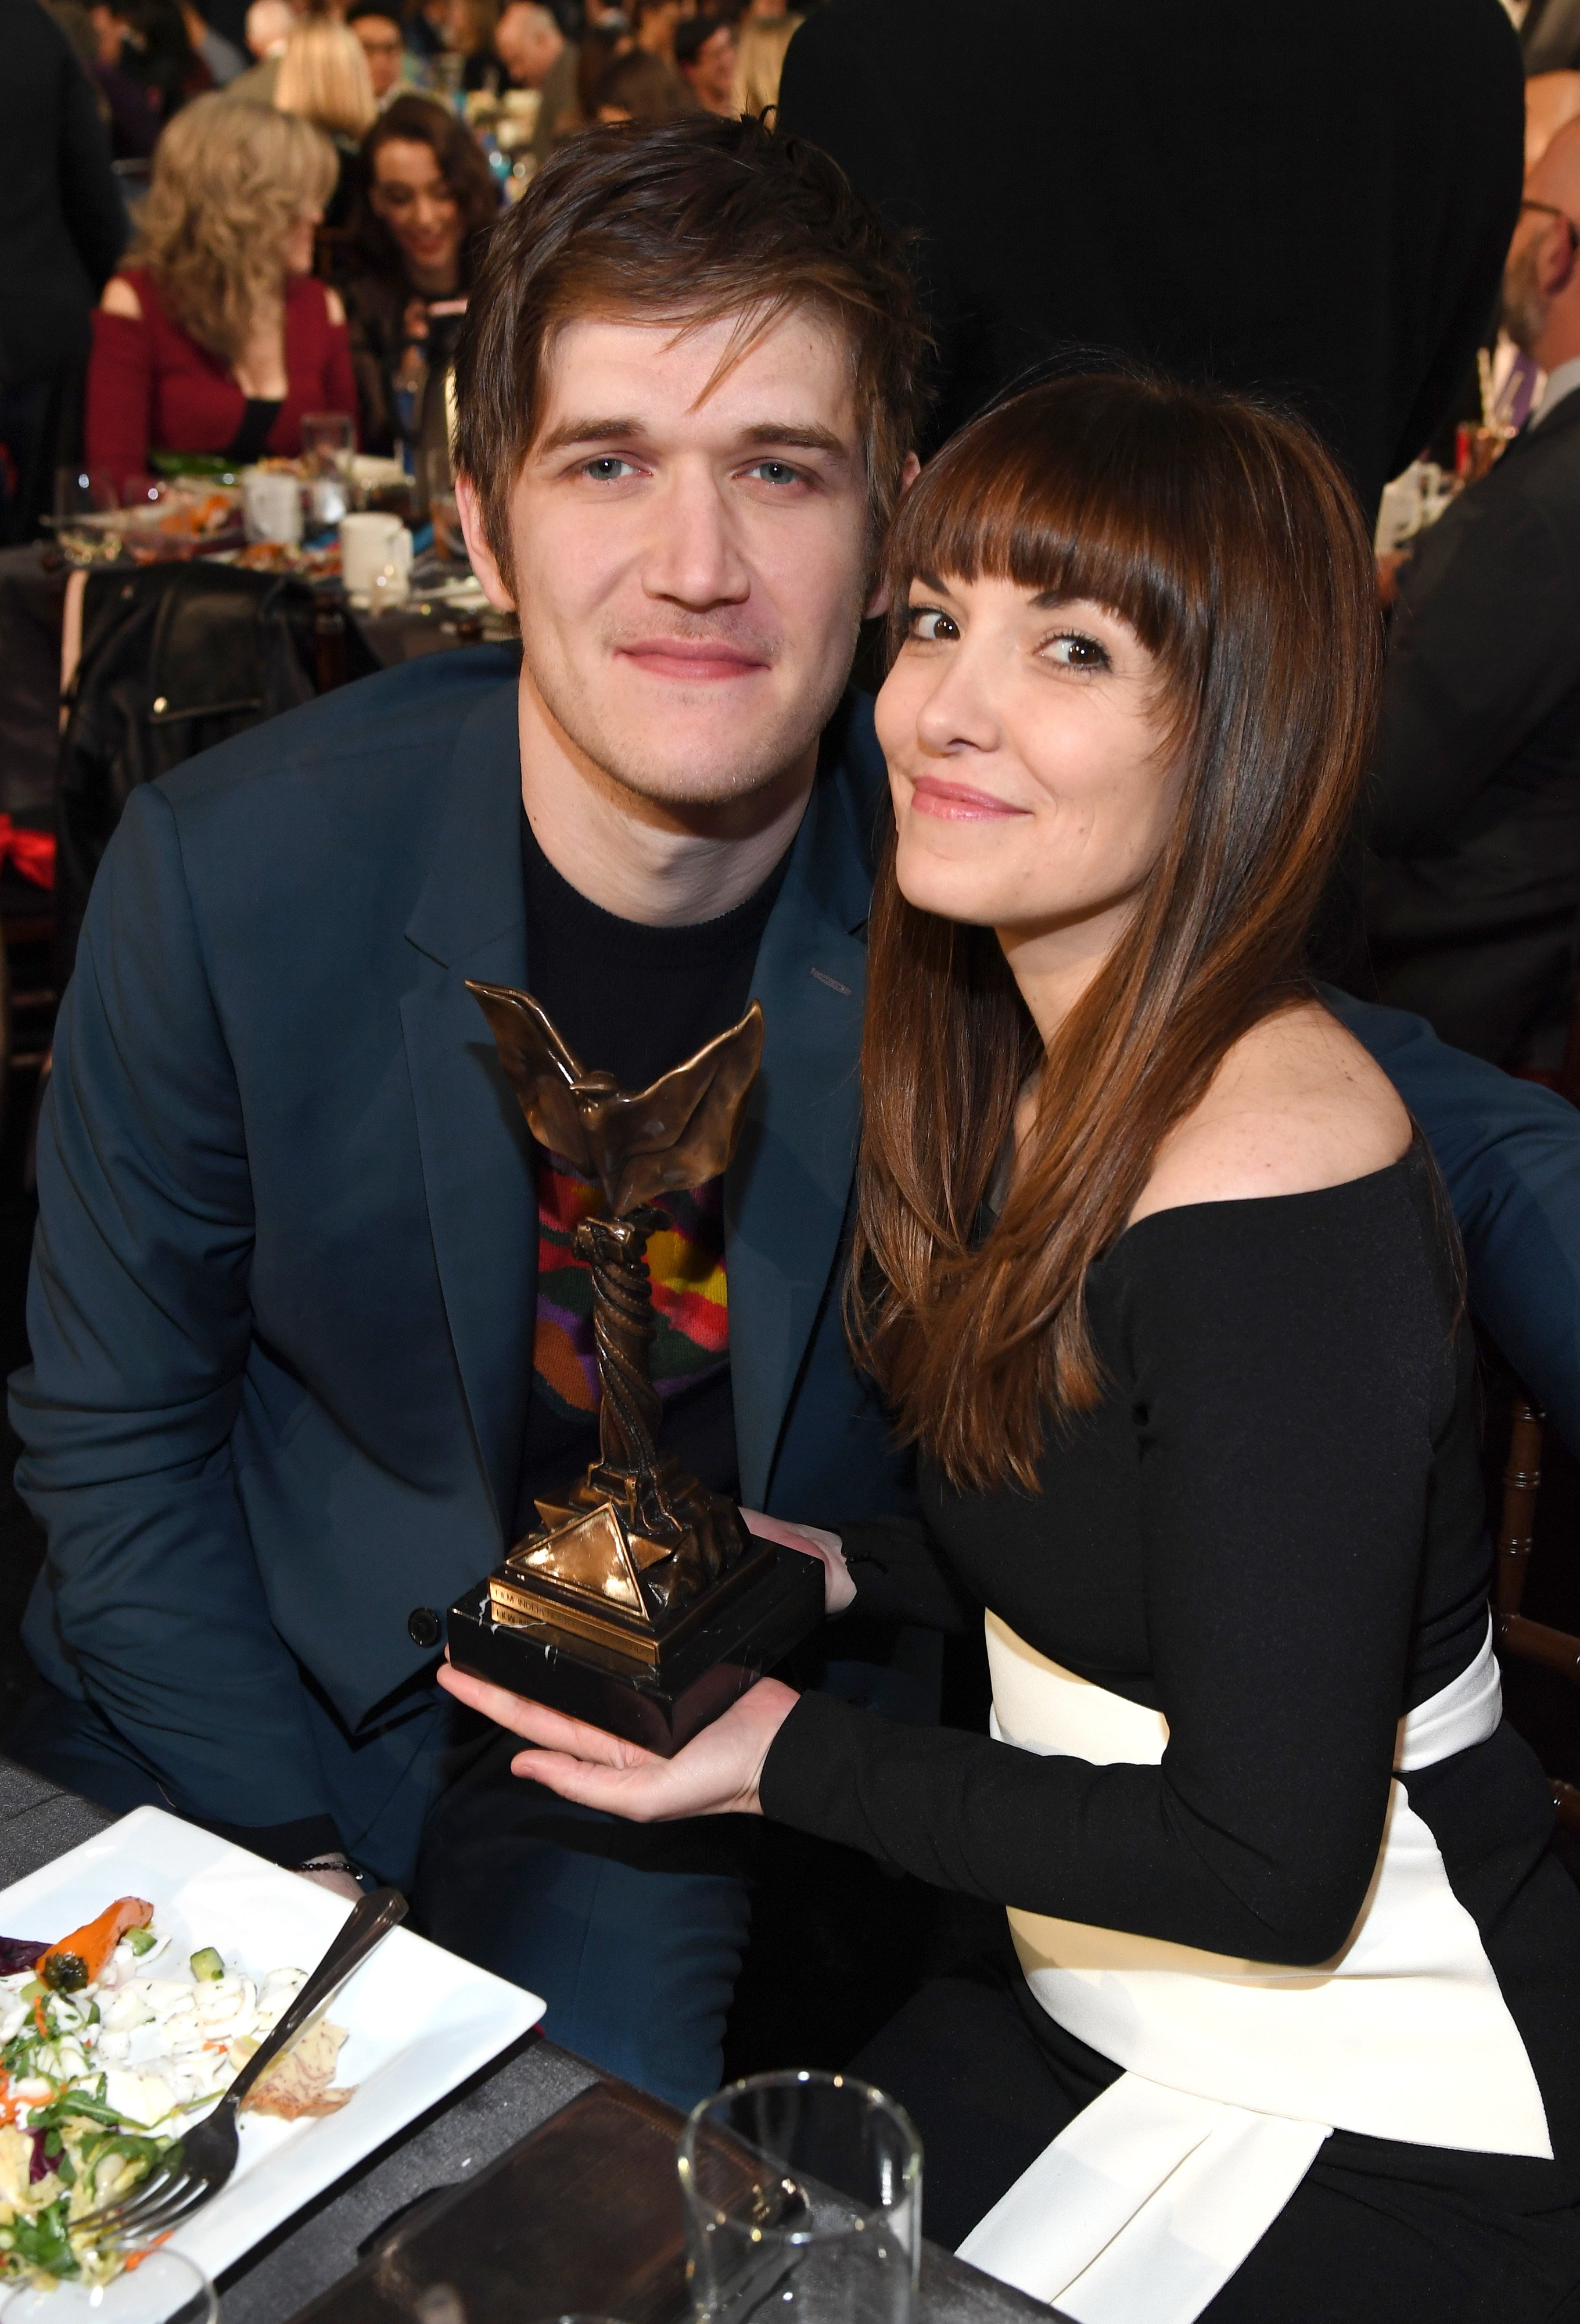 Bo Burnham and Lorene Scafaria during the 2019 Film Independent Spirit Awards on February 23, 2019 in Santa Monica, California. | Source: Getty Images